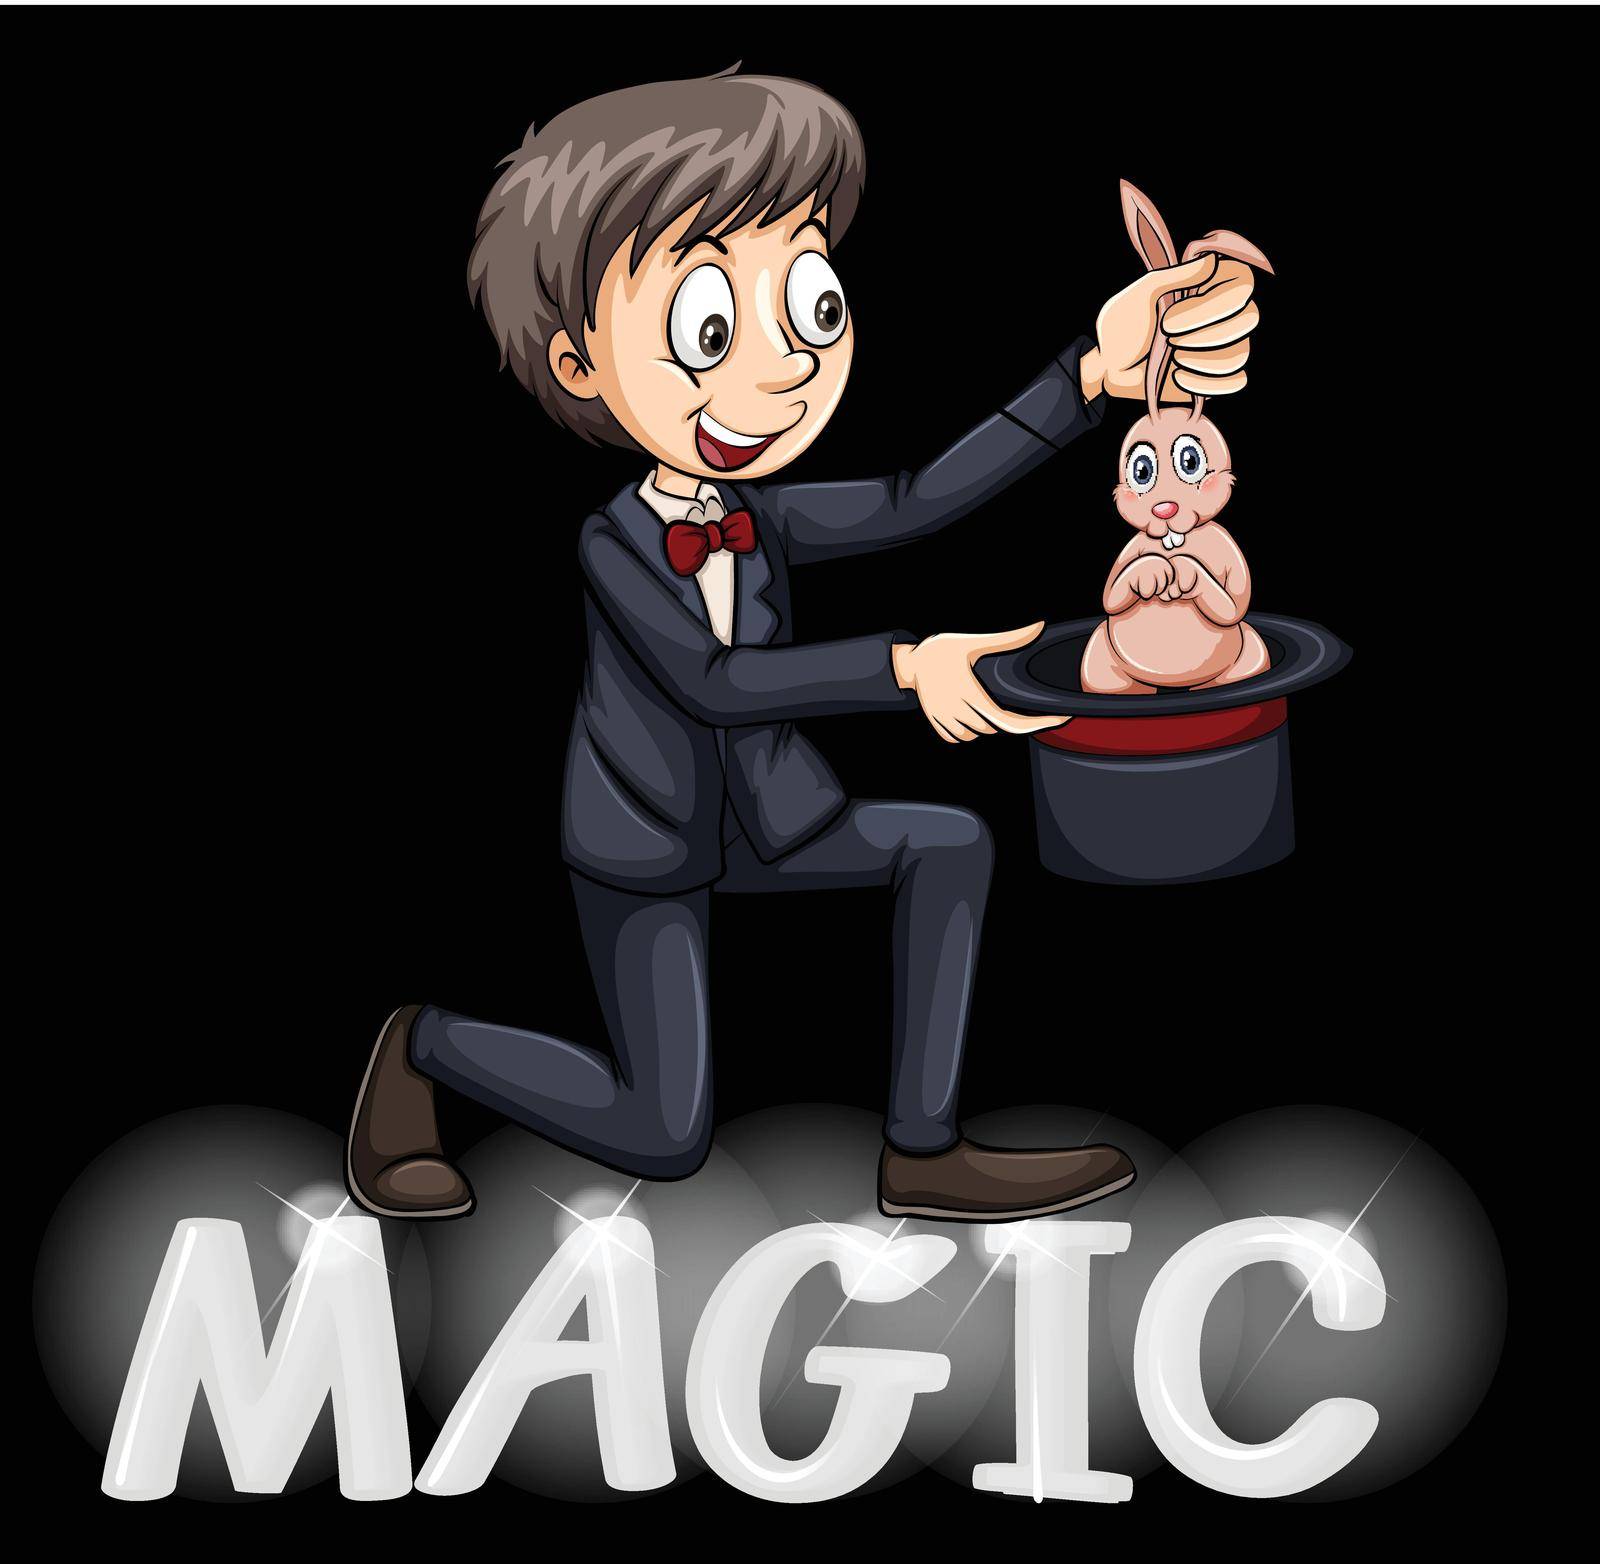 Magician using a hat by iimages